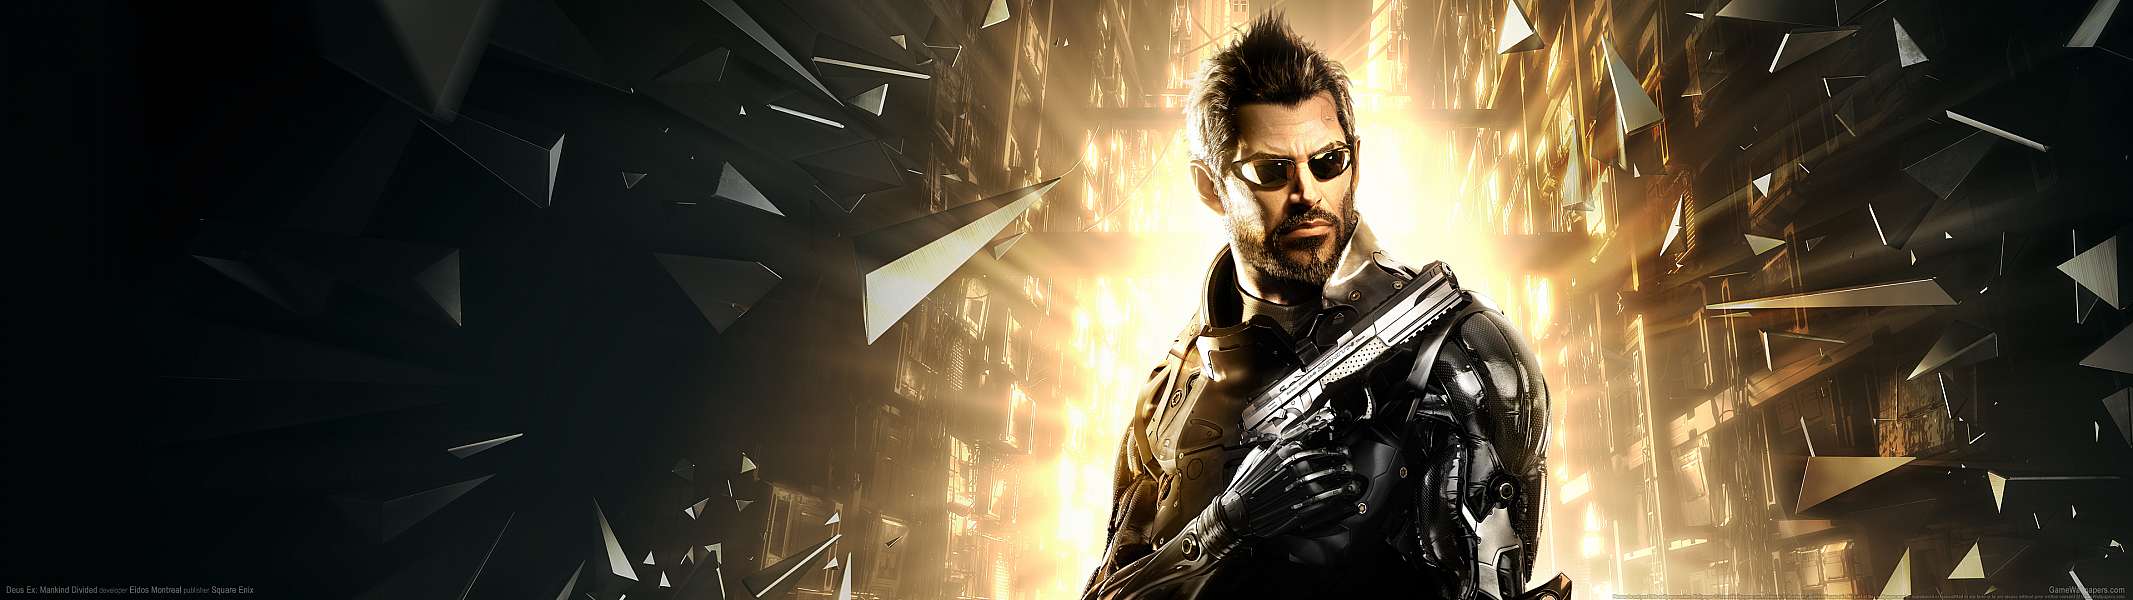 Deus Ex: Mankind Divided dual screen wallpaper or background